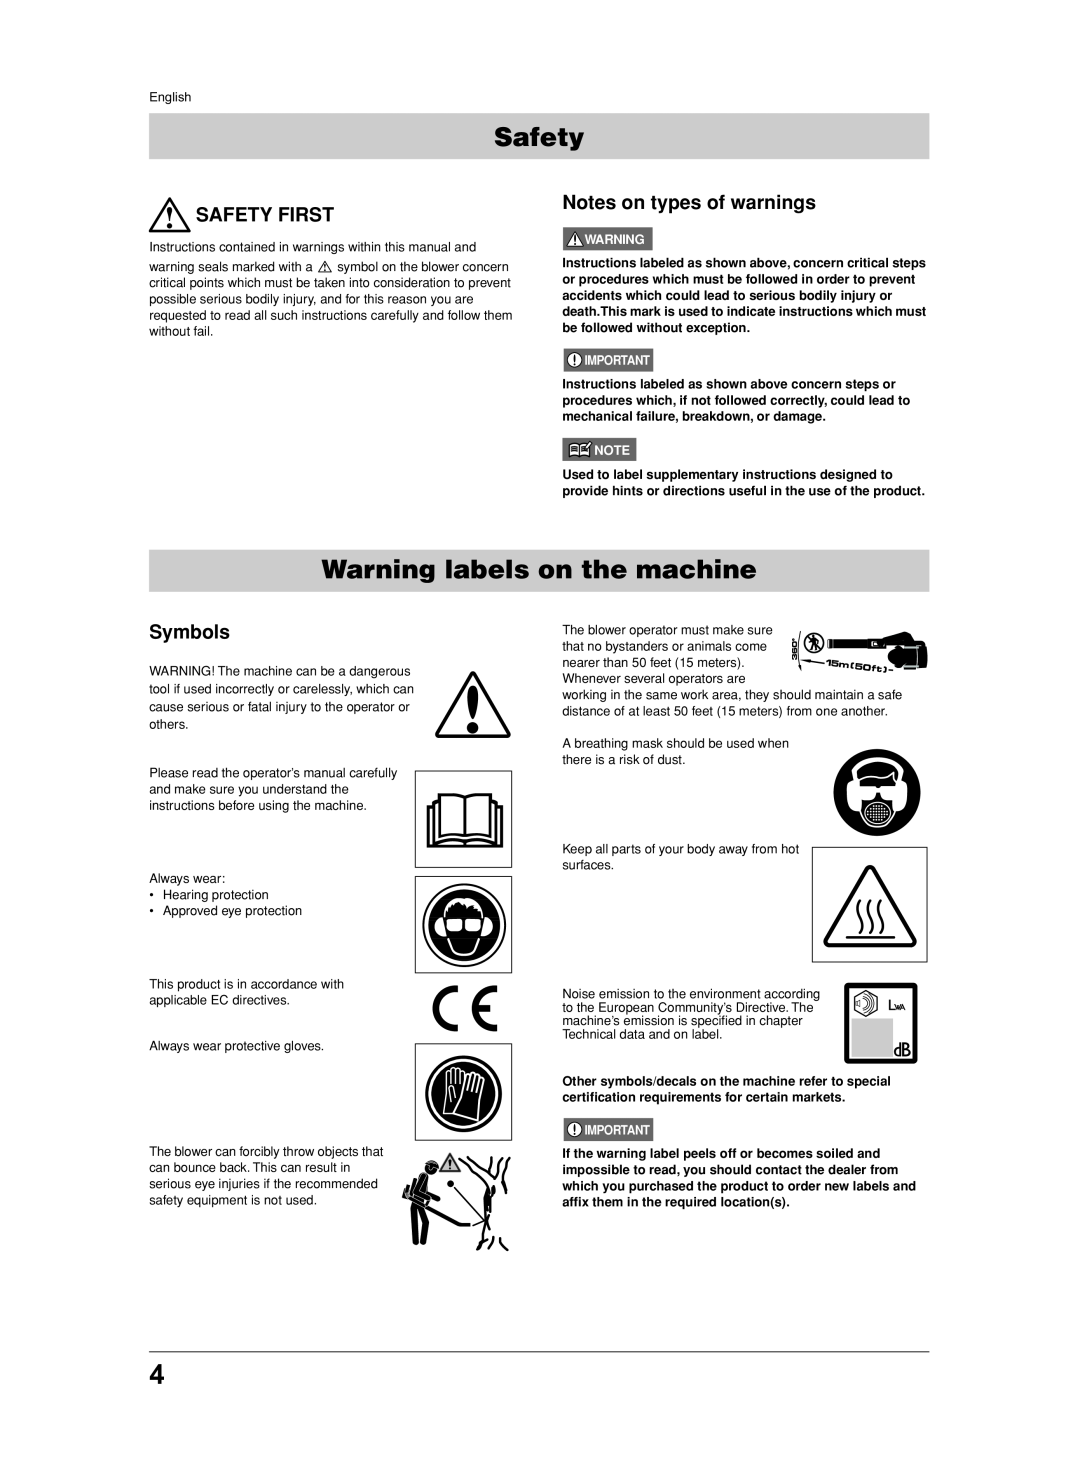 Jonsered BB2250 manual Warning labels on the machine, Safety First, Notes on types of warnings, Symbols 